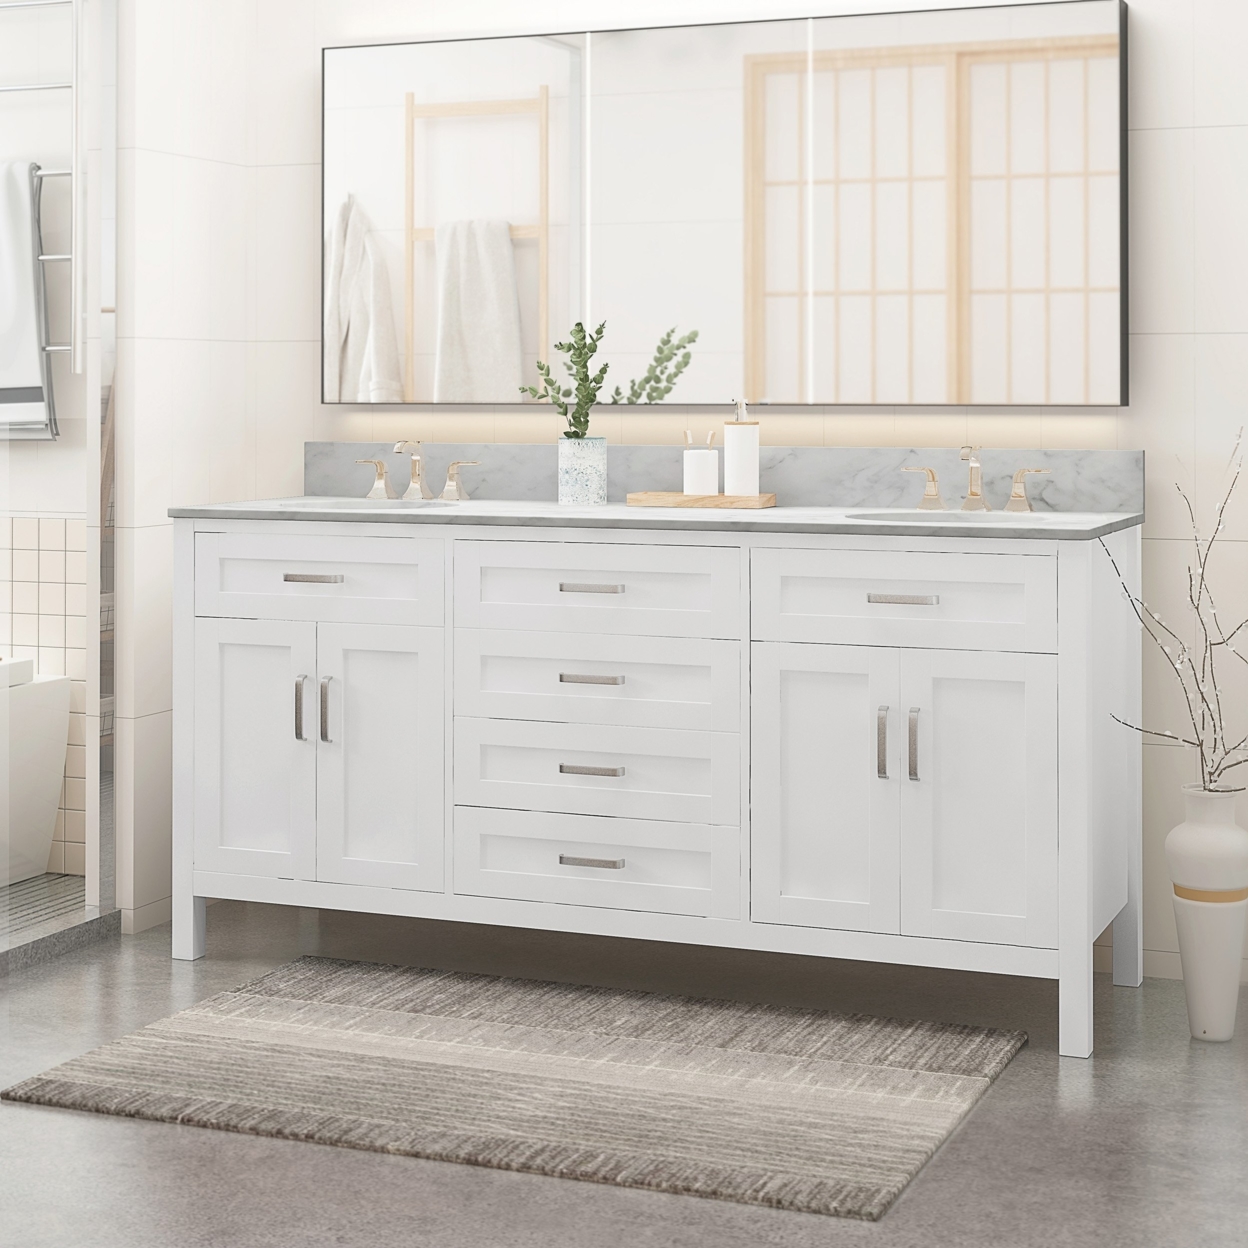 Greeley Contemporary 72 Wood Double Sink Bathroom Vanity With Marble Counter Top With Carrara White Marble - White